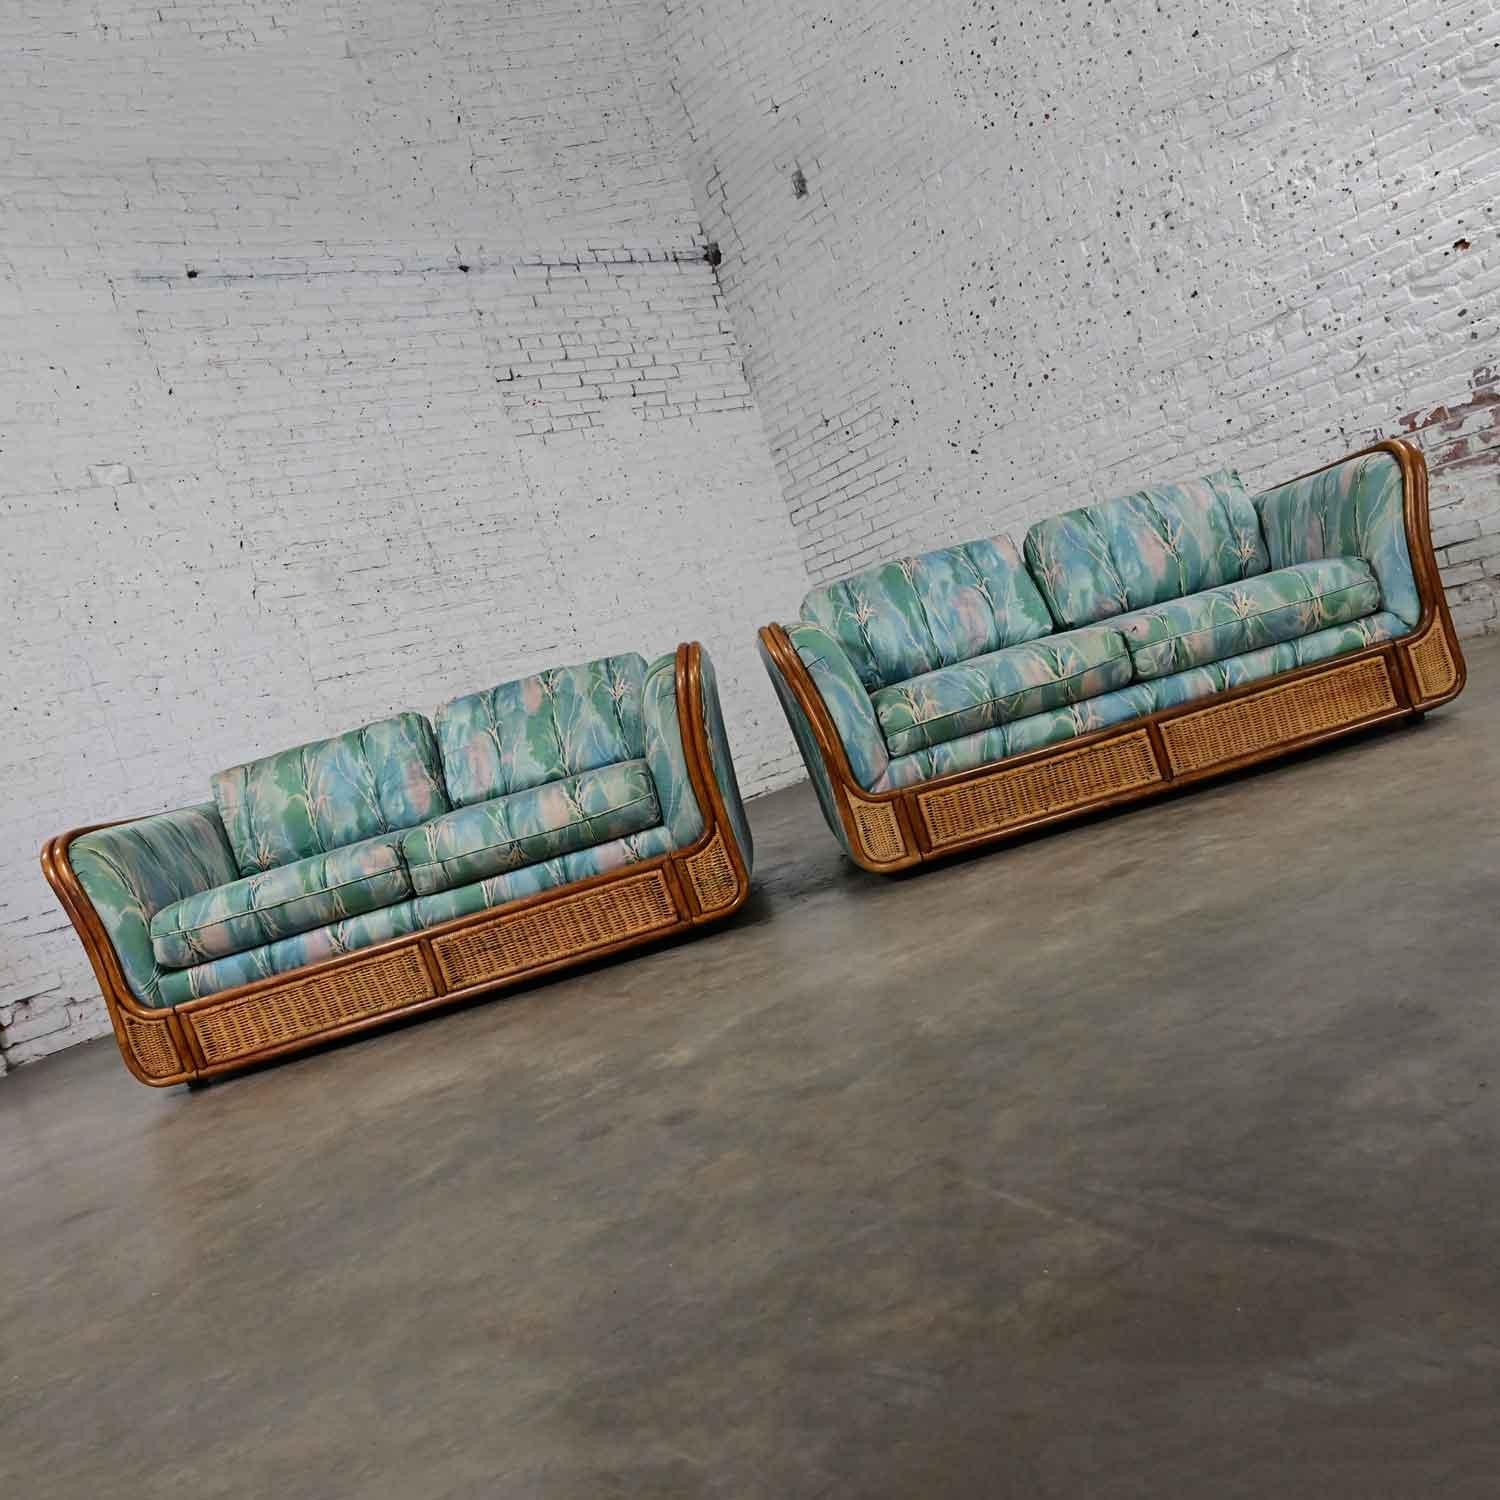 Late 20th Century Boho Chic Rattan & Wicker Tuxedo Style Upholstered Loveseats For Sale 1